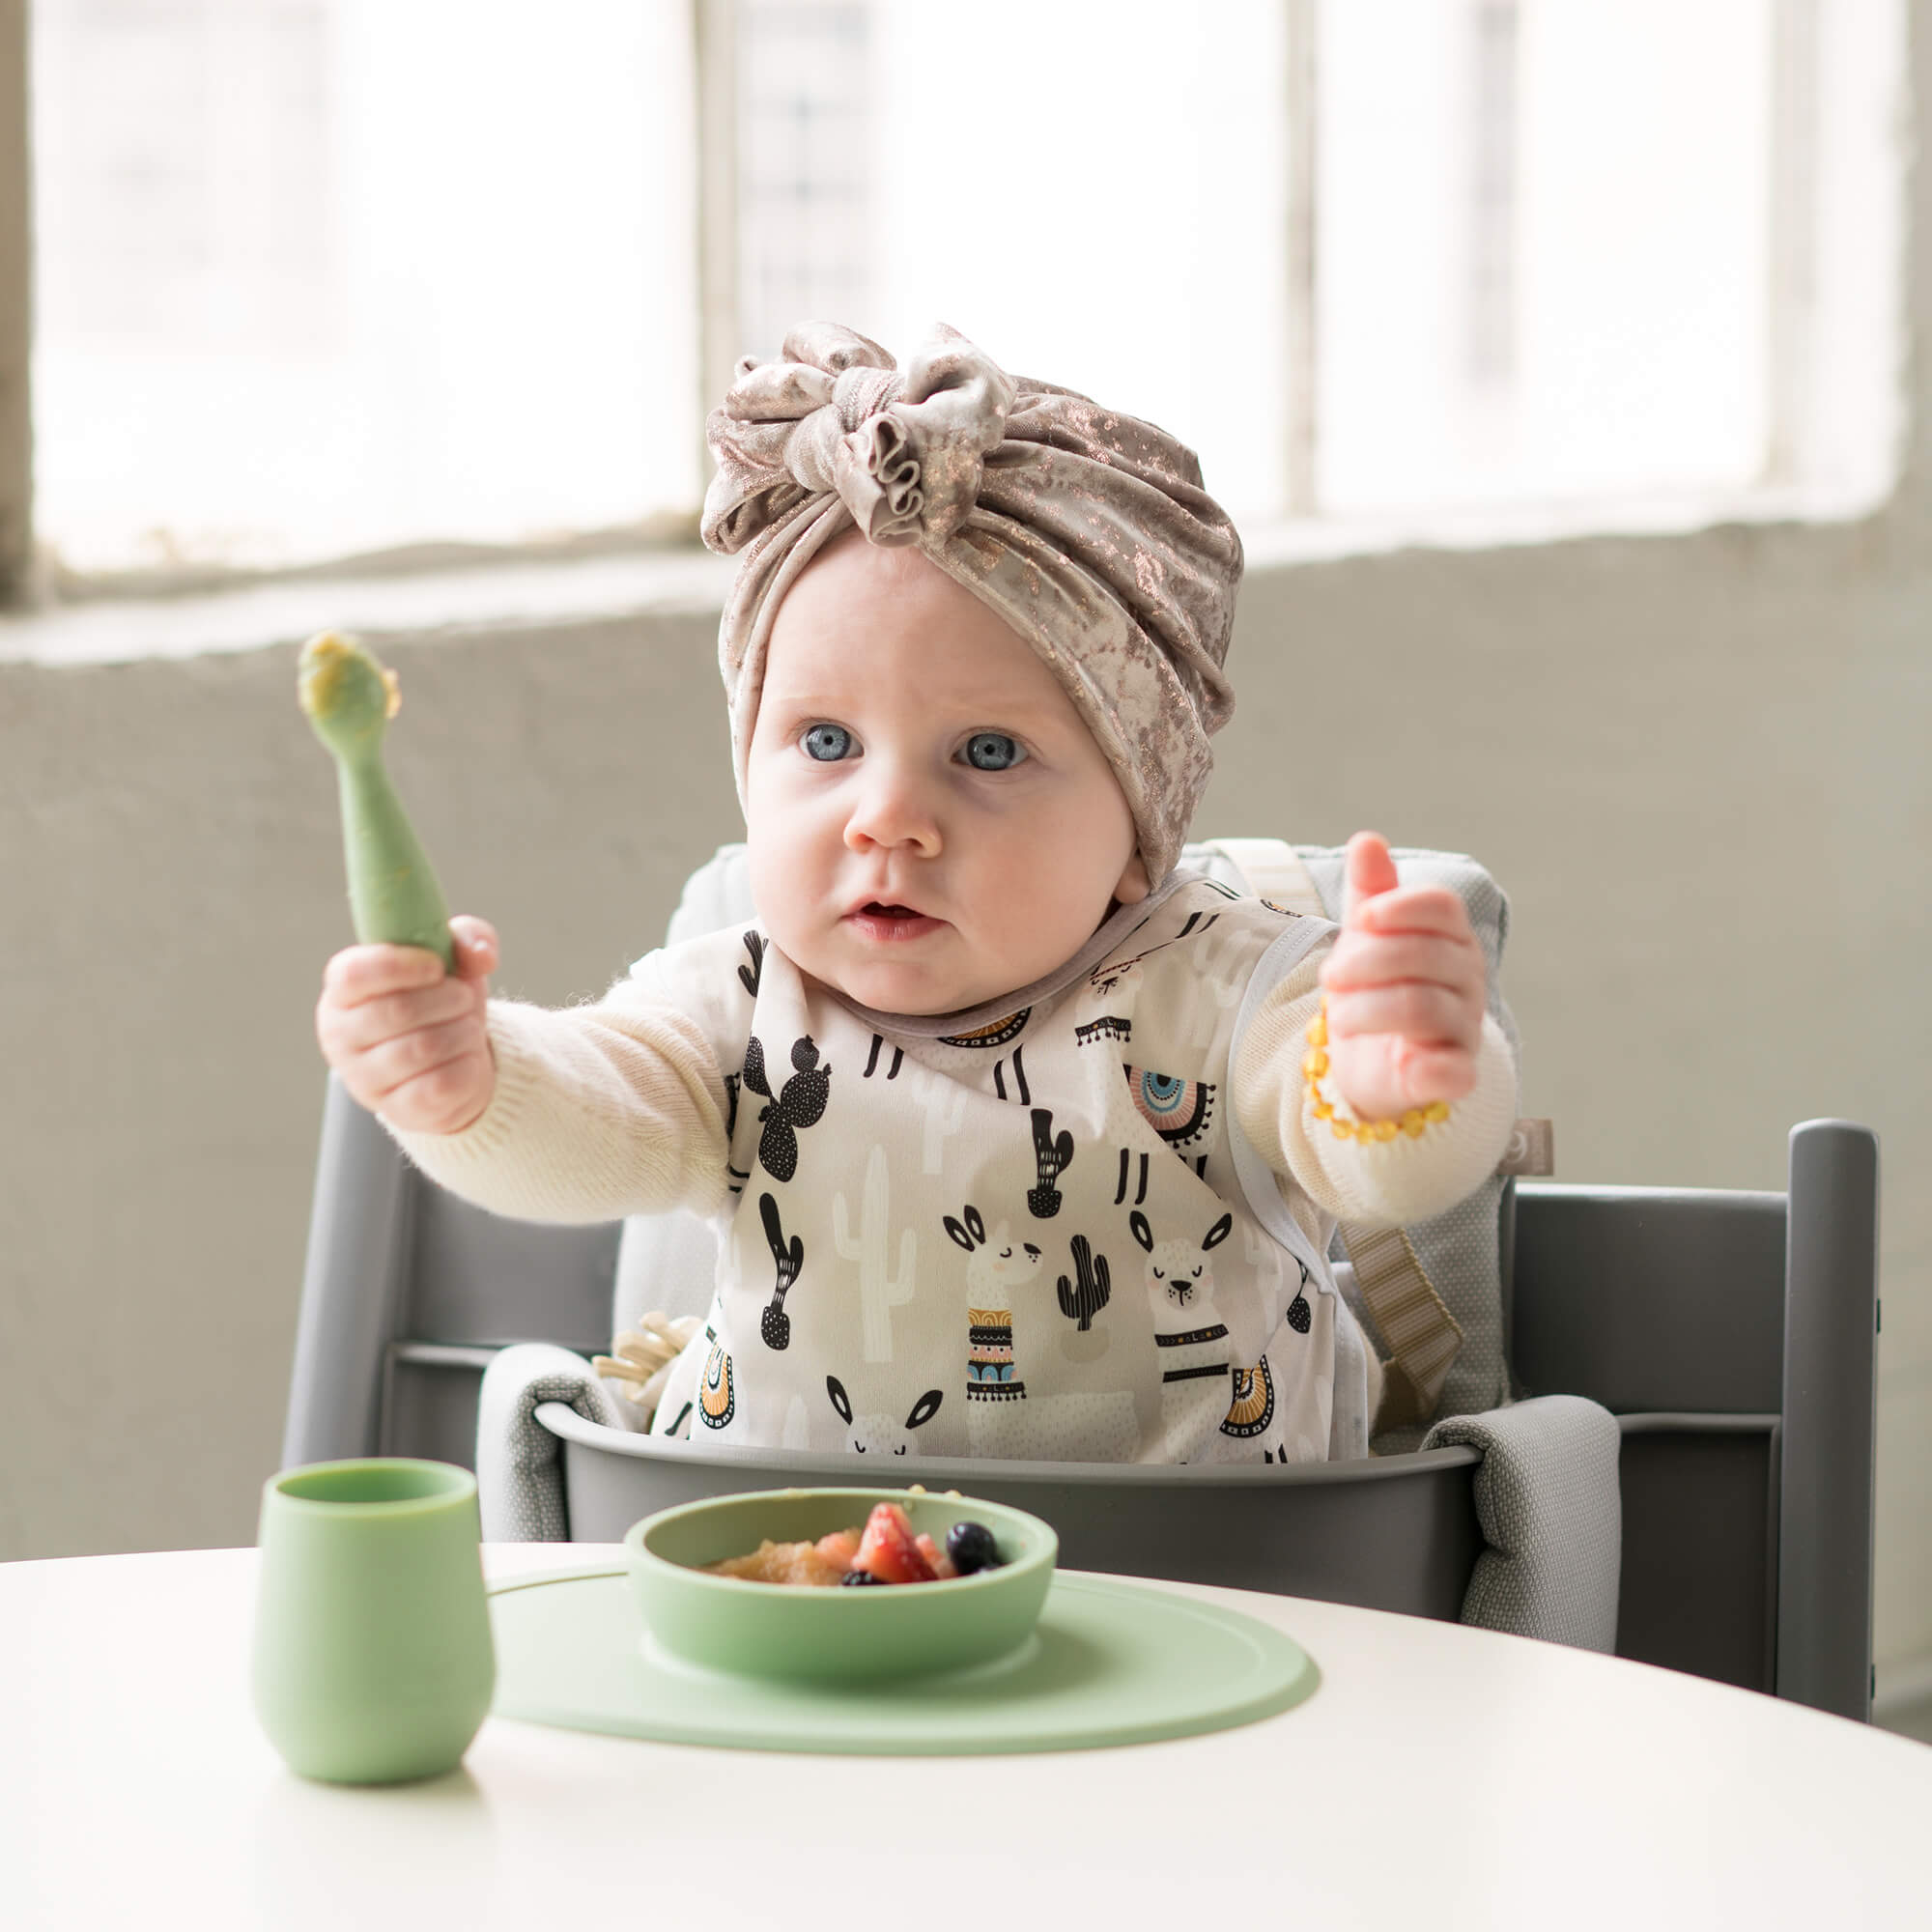 Ezpz Mini Utensils (Fork & Spoon in Gray) - 100% BPA Free Fork and Spoon  for Toddlers First Foods + Self-Feeding - Designed by a Pediatric Feeding